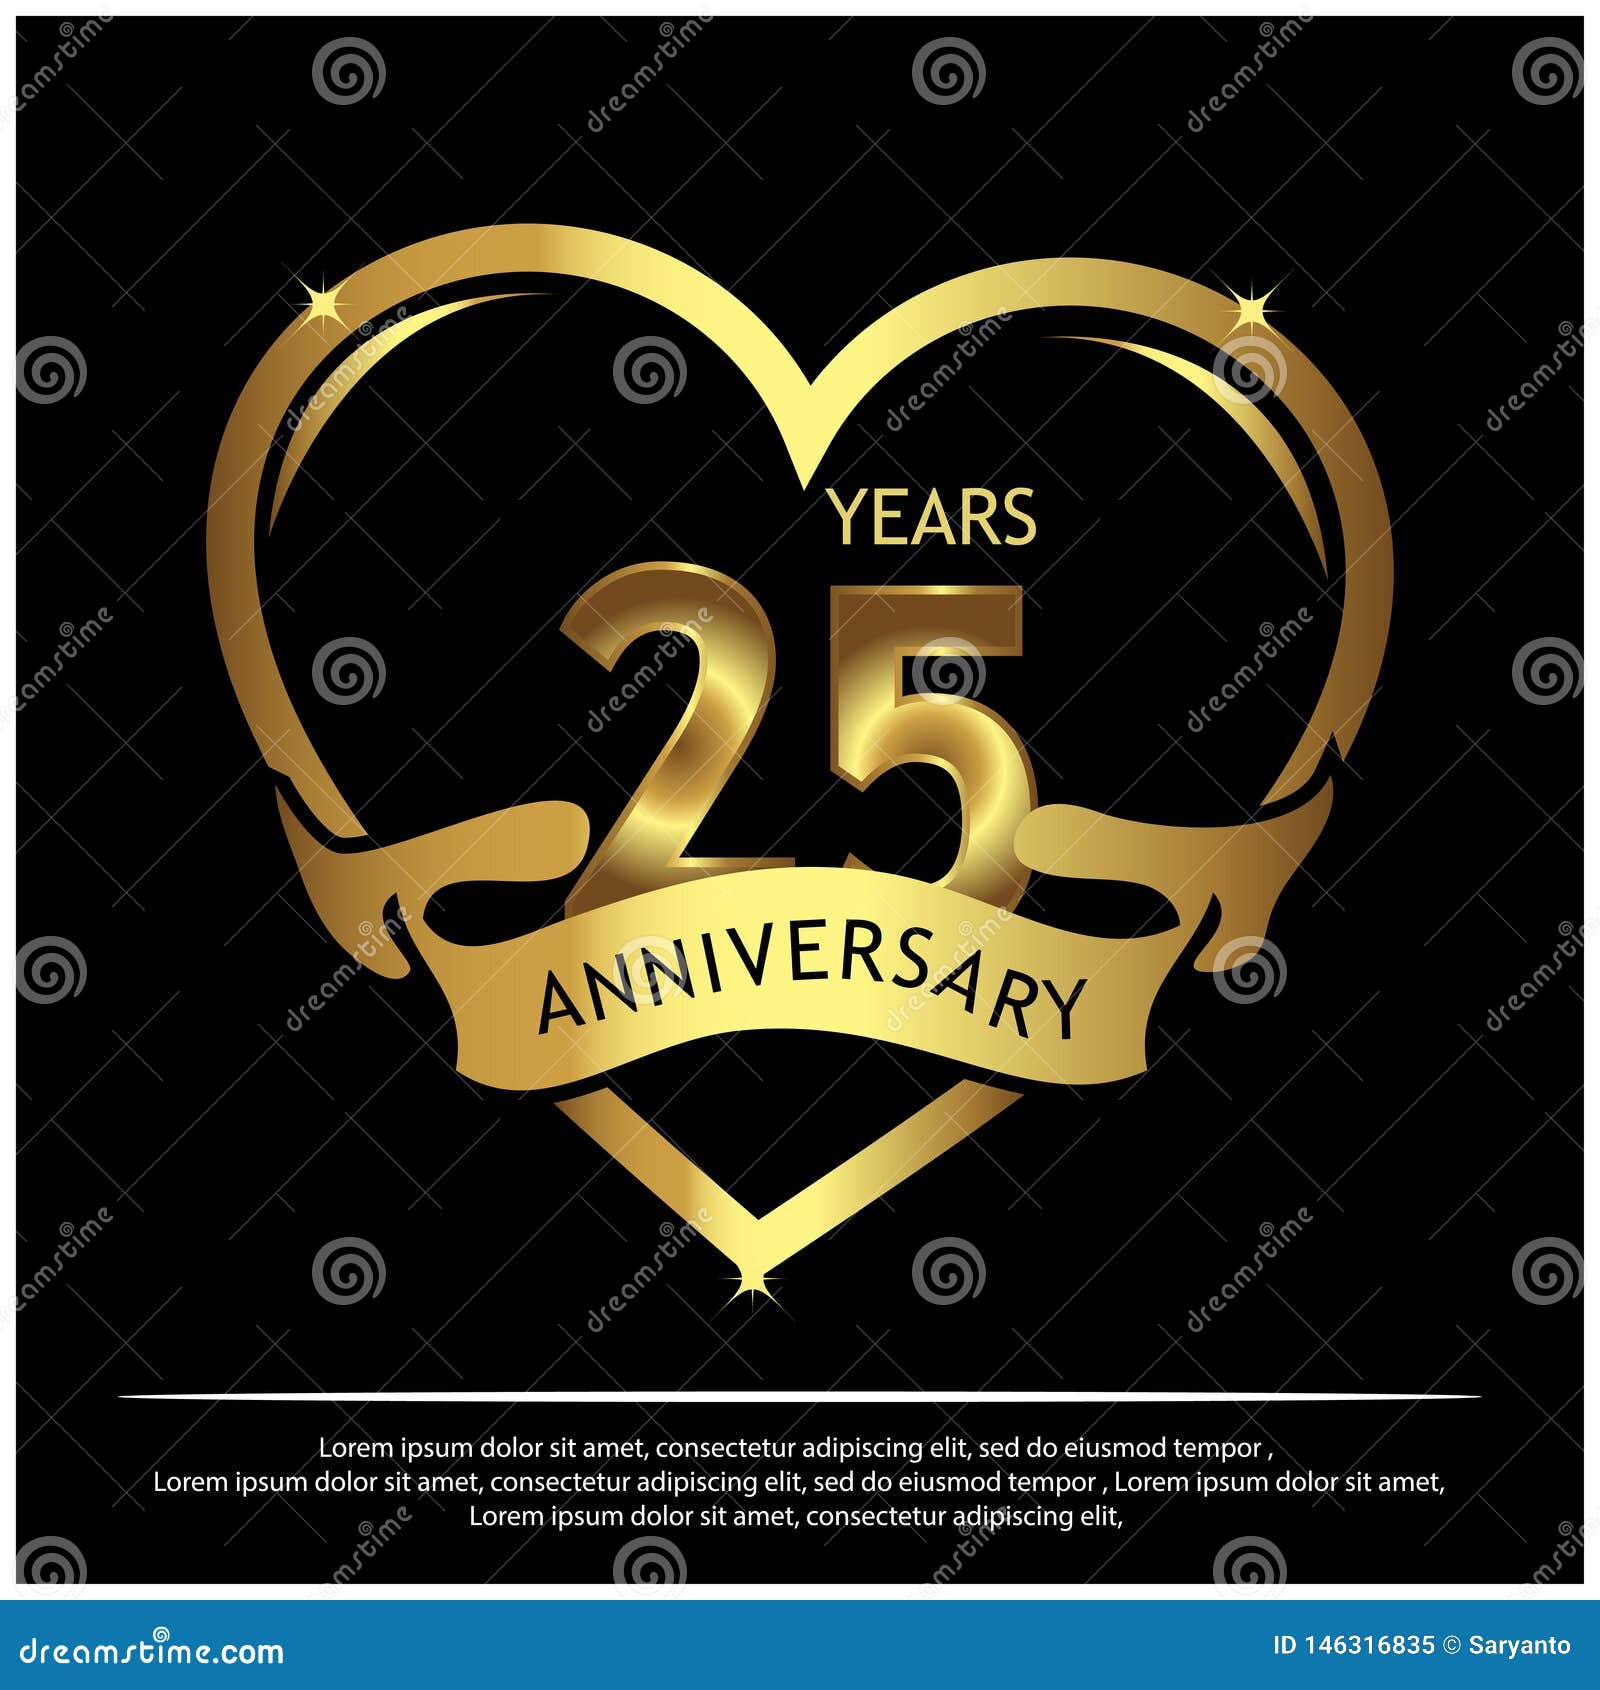 25 Years Anniversary Golden Anniversary Template Design For Web Game Creative Poster Booklet Leaflet Flyer Magazine Invita Stock Vector Illustration Of Icon Abstract